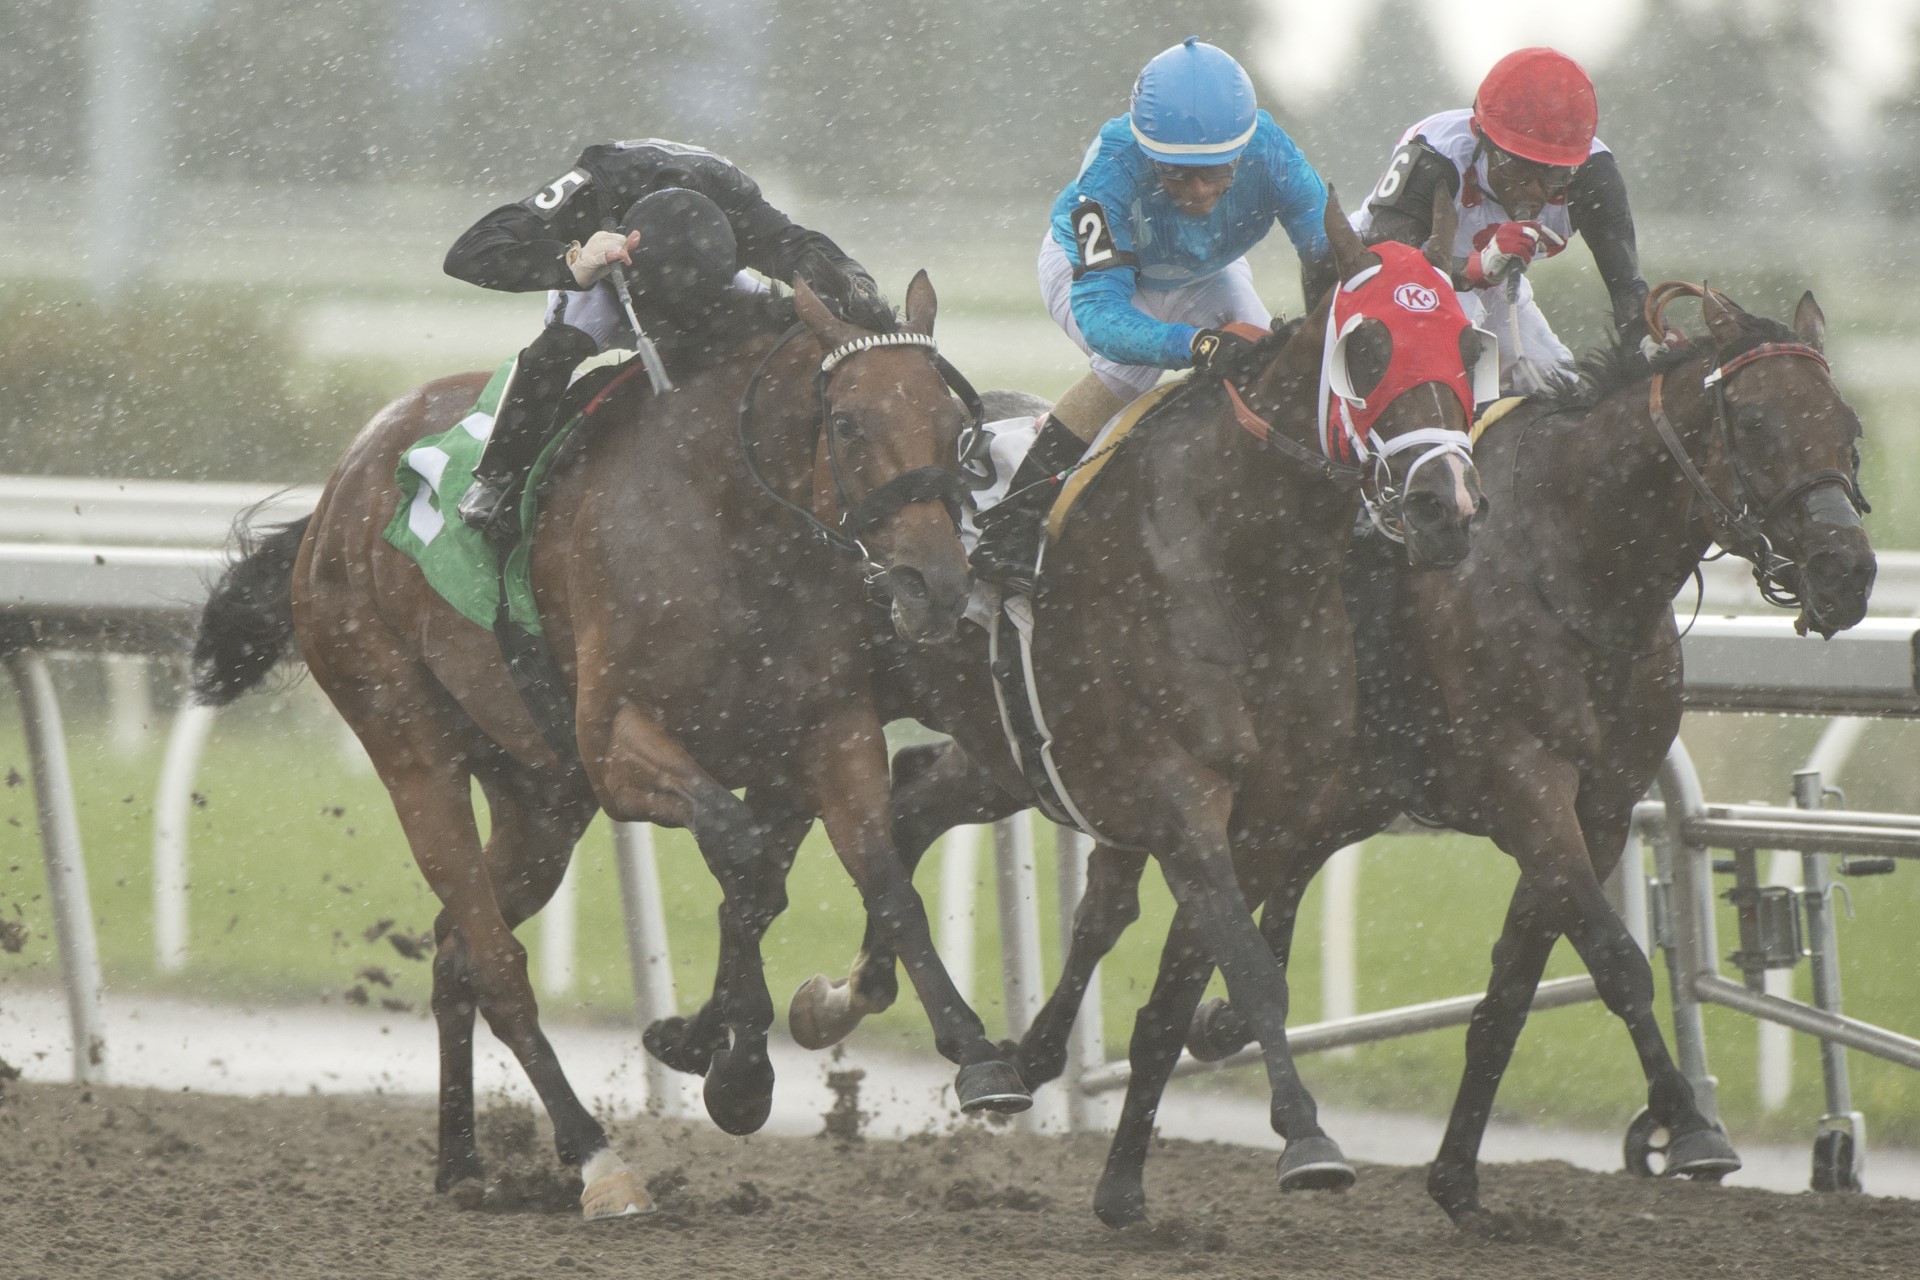 Il Malocchio (left) edges Angelou (centre) and Super Hoity Toity (right) in Sunday's Grade 3 Trillium Stakes Presented by Stella Artois. (Michael Burns Photo)